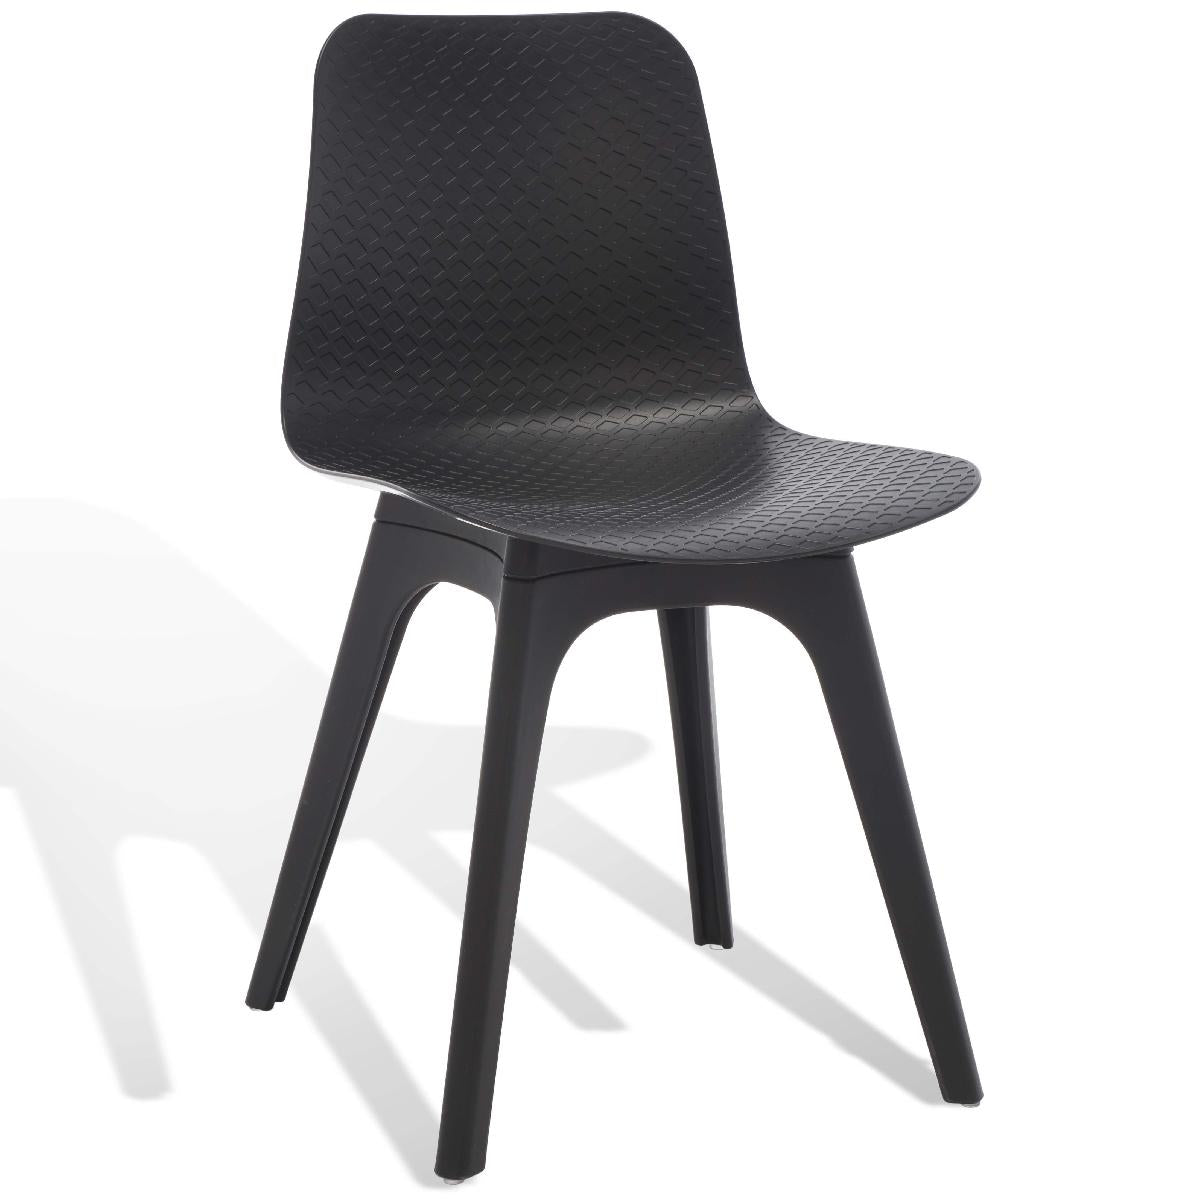 Safavieh Couture Damiano Molded Plastic Dining Chair - Black